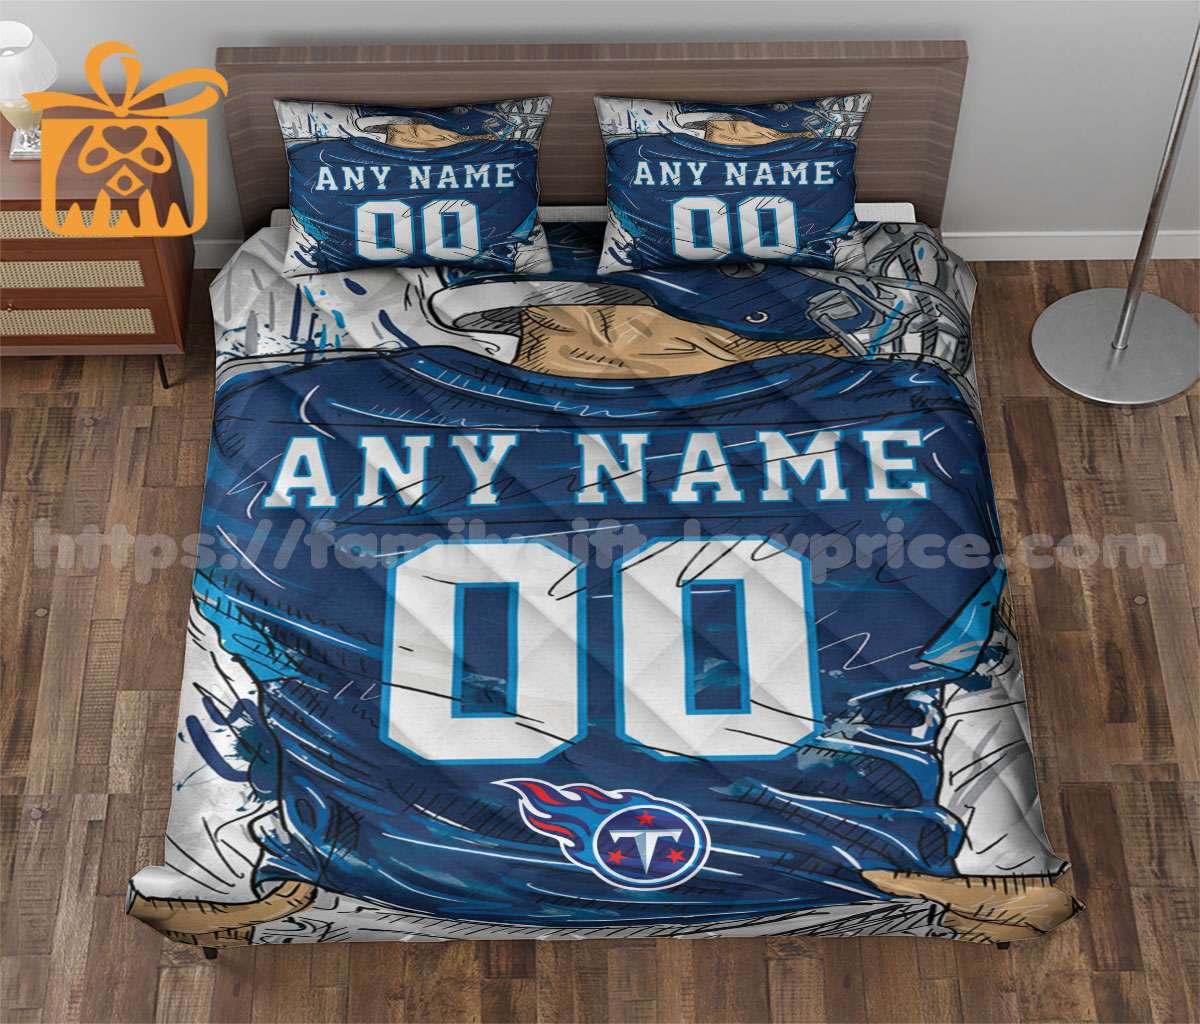 NFL Titans Jersey Customized Quilt Bedding Set - Custom Any Name and Number for Men Women